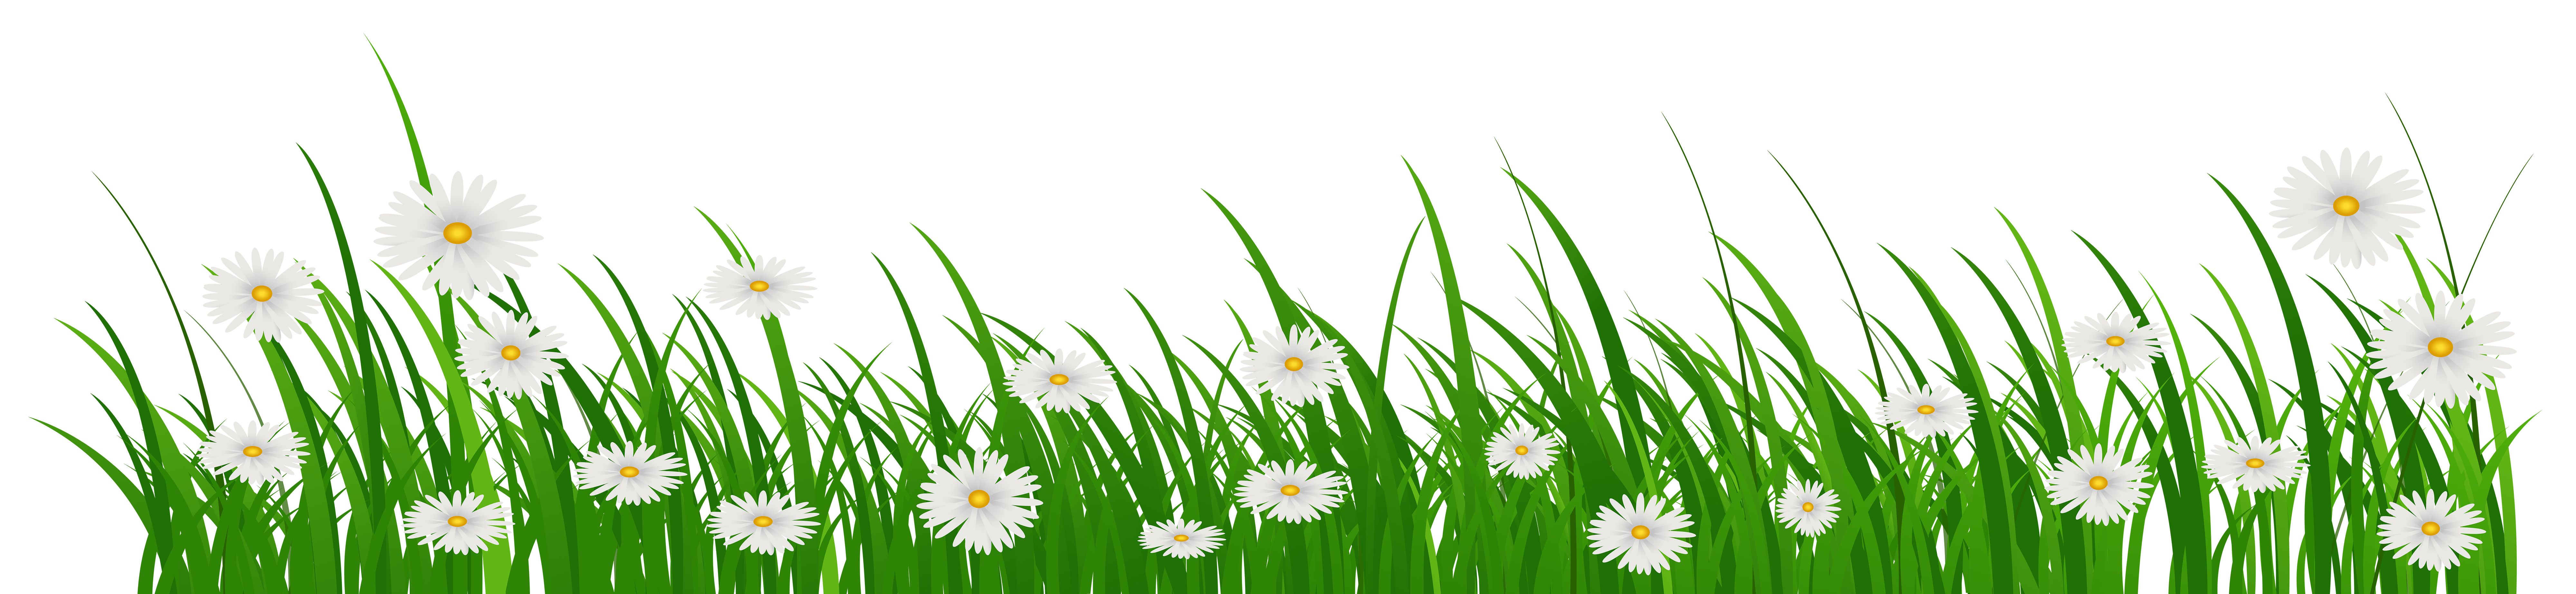 Grass with Flowers PNG Clip Art Image